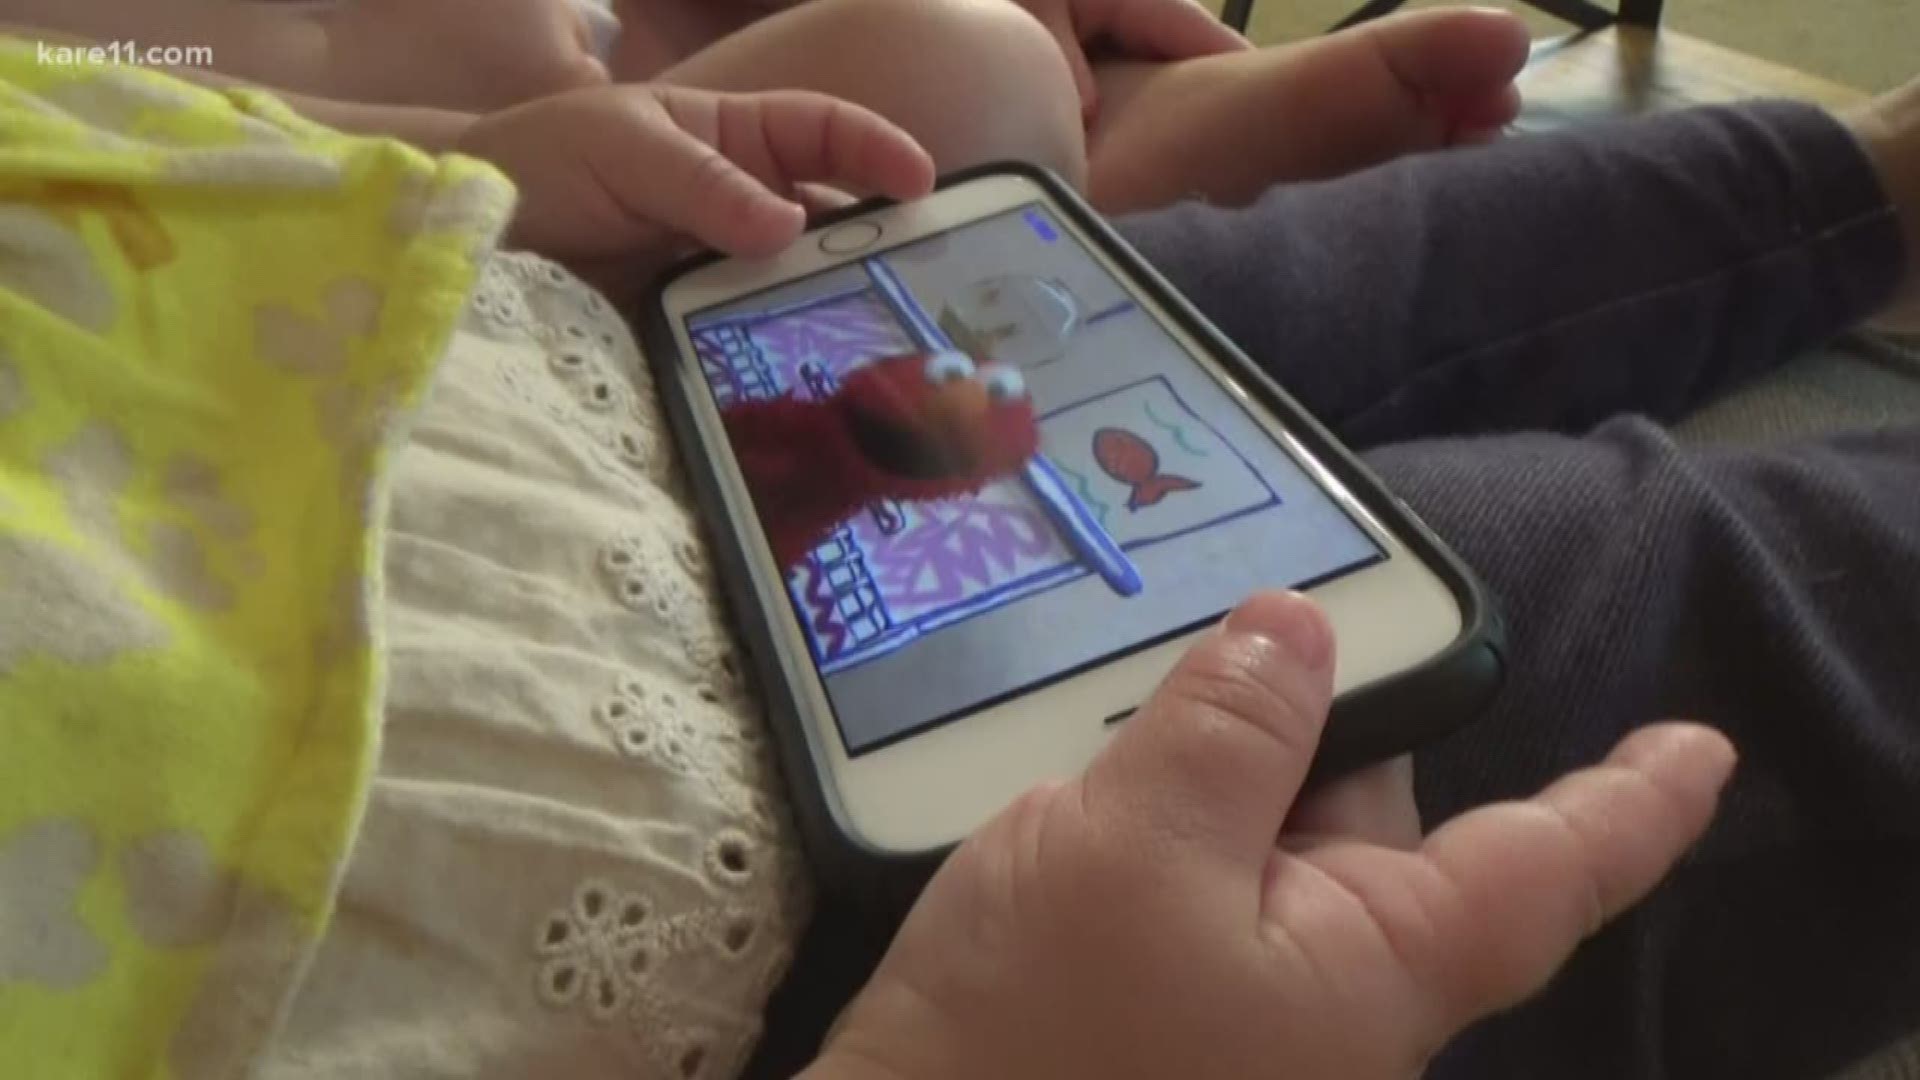 1 in 5 have a phone by age 8, but what's more surprising is how much time kids spend on their phones.